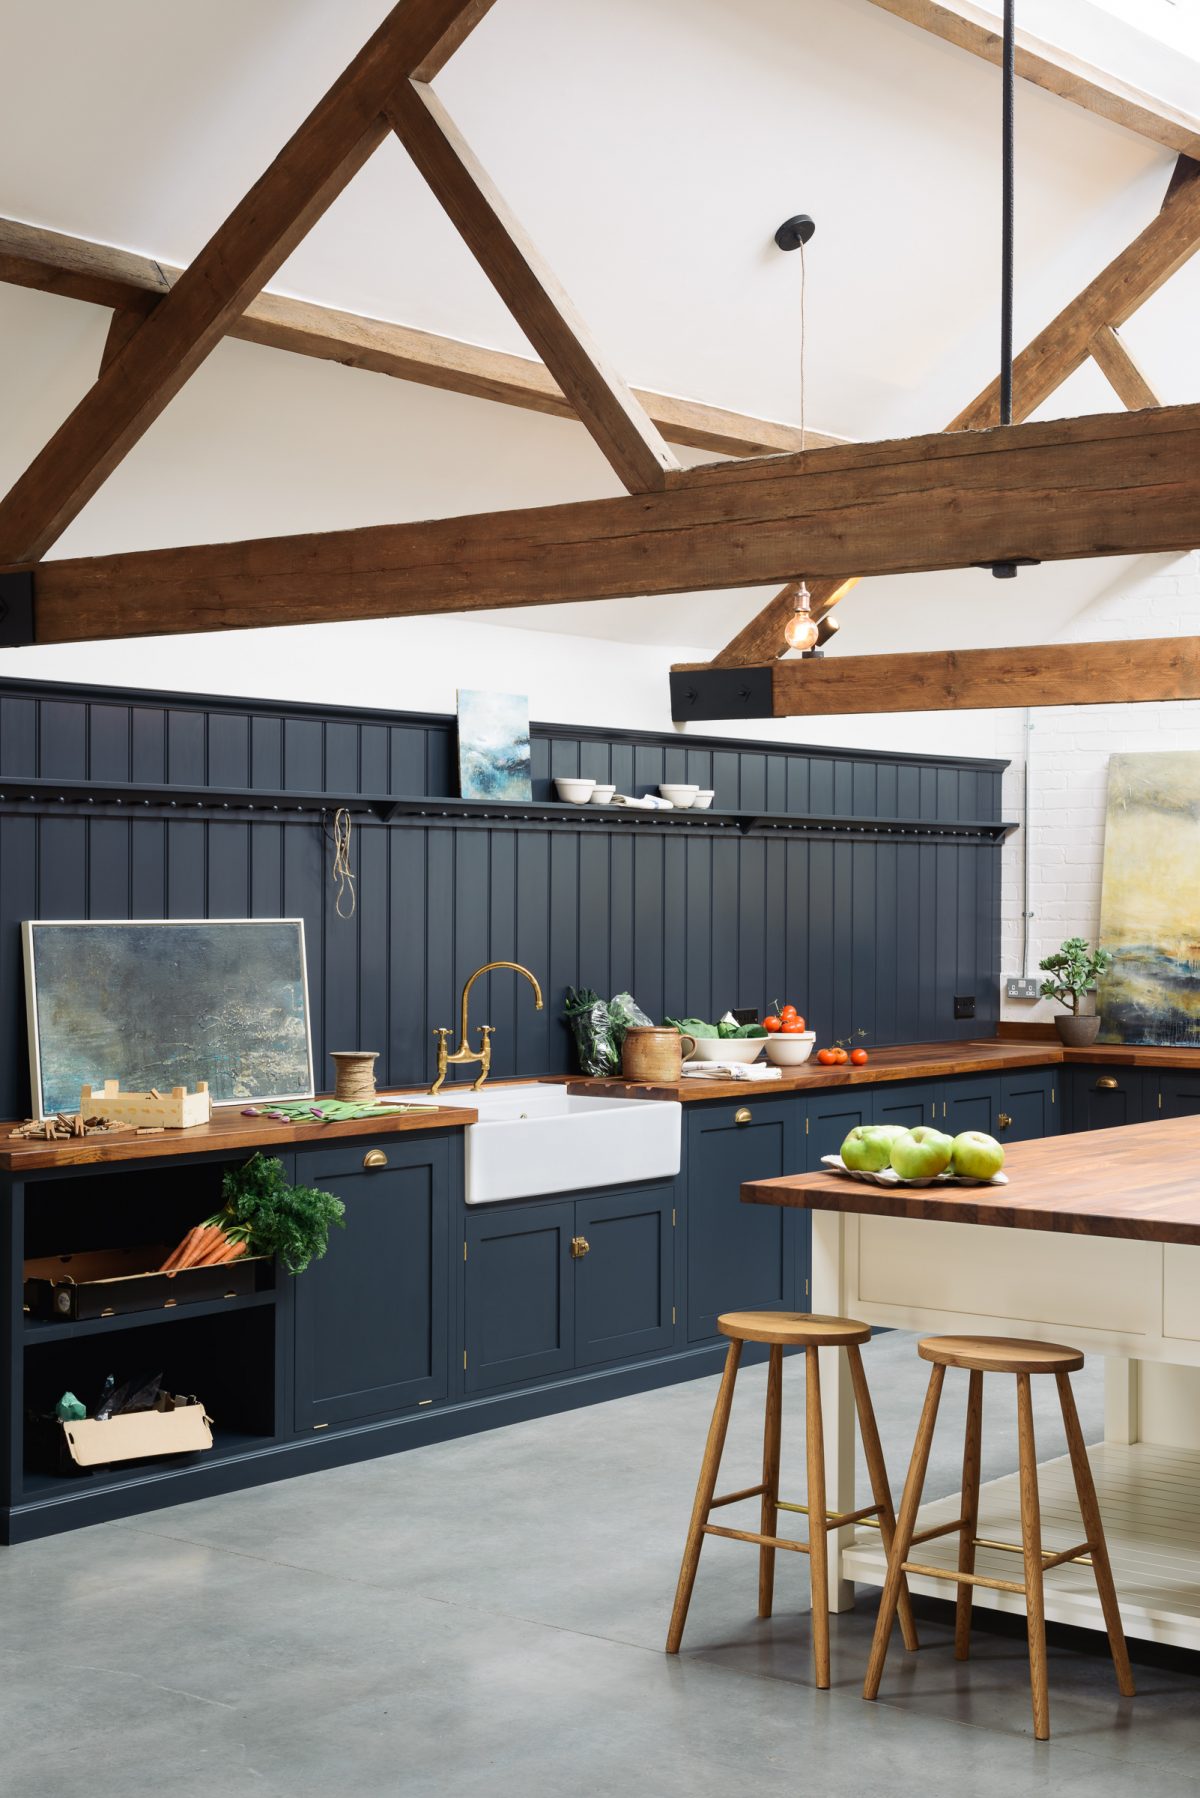 A whole wall of tongue and groove panelling looked really impressive, hand-painted in Pantry Blue.